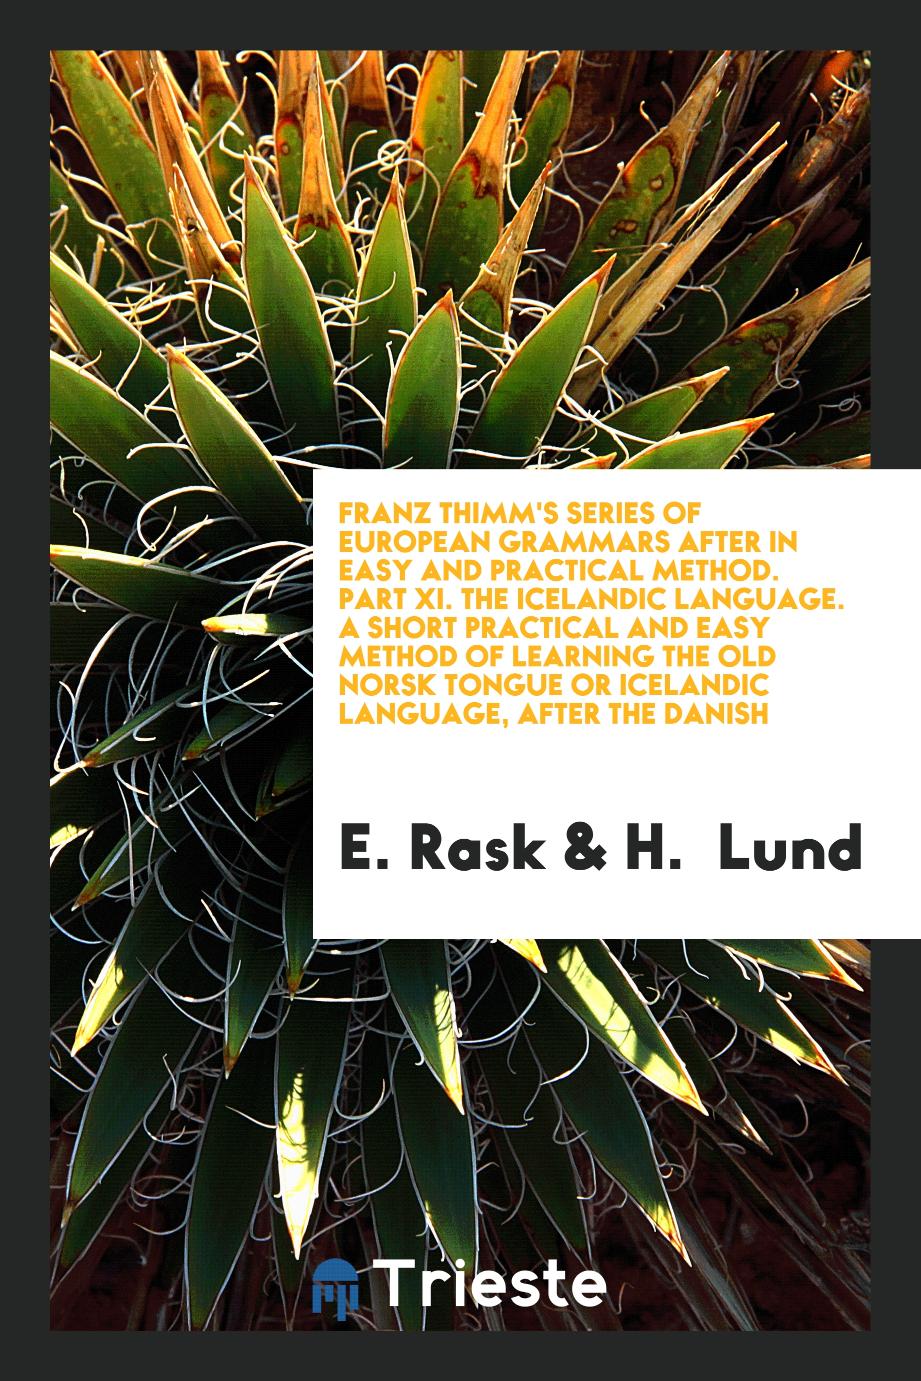 Franz Thimm's Series of European Grammars After in Easy and Practical Method. Part XI. The Icelandic Language. A Short Practical and Easy Method of Learning the Old Norsk Tongue or Icelandic Language, After the Danish